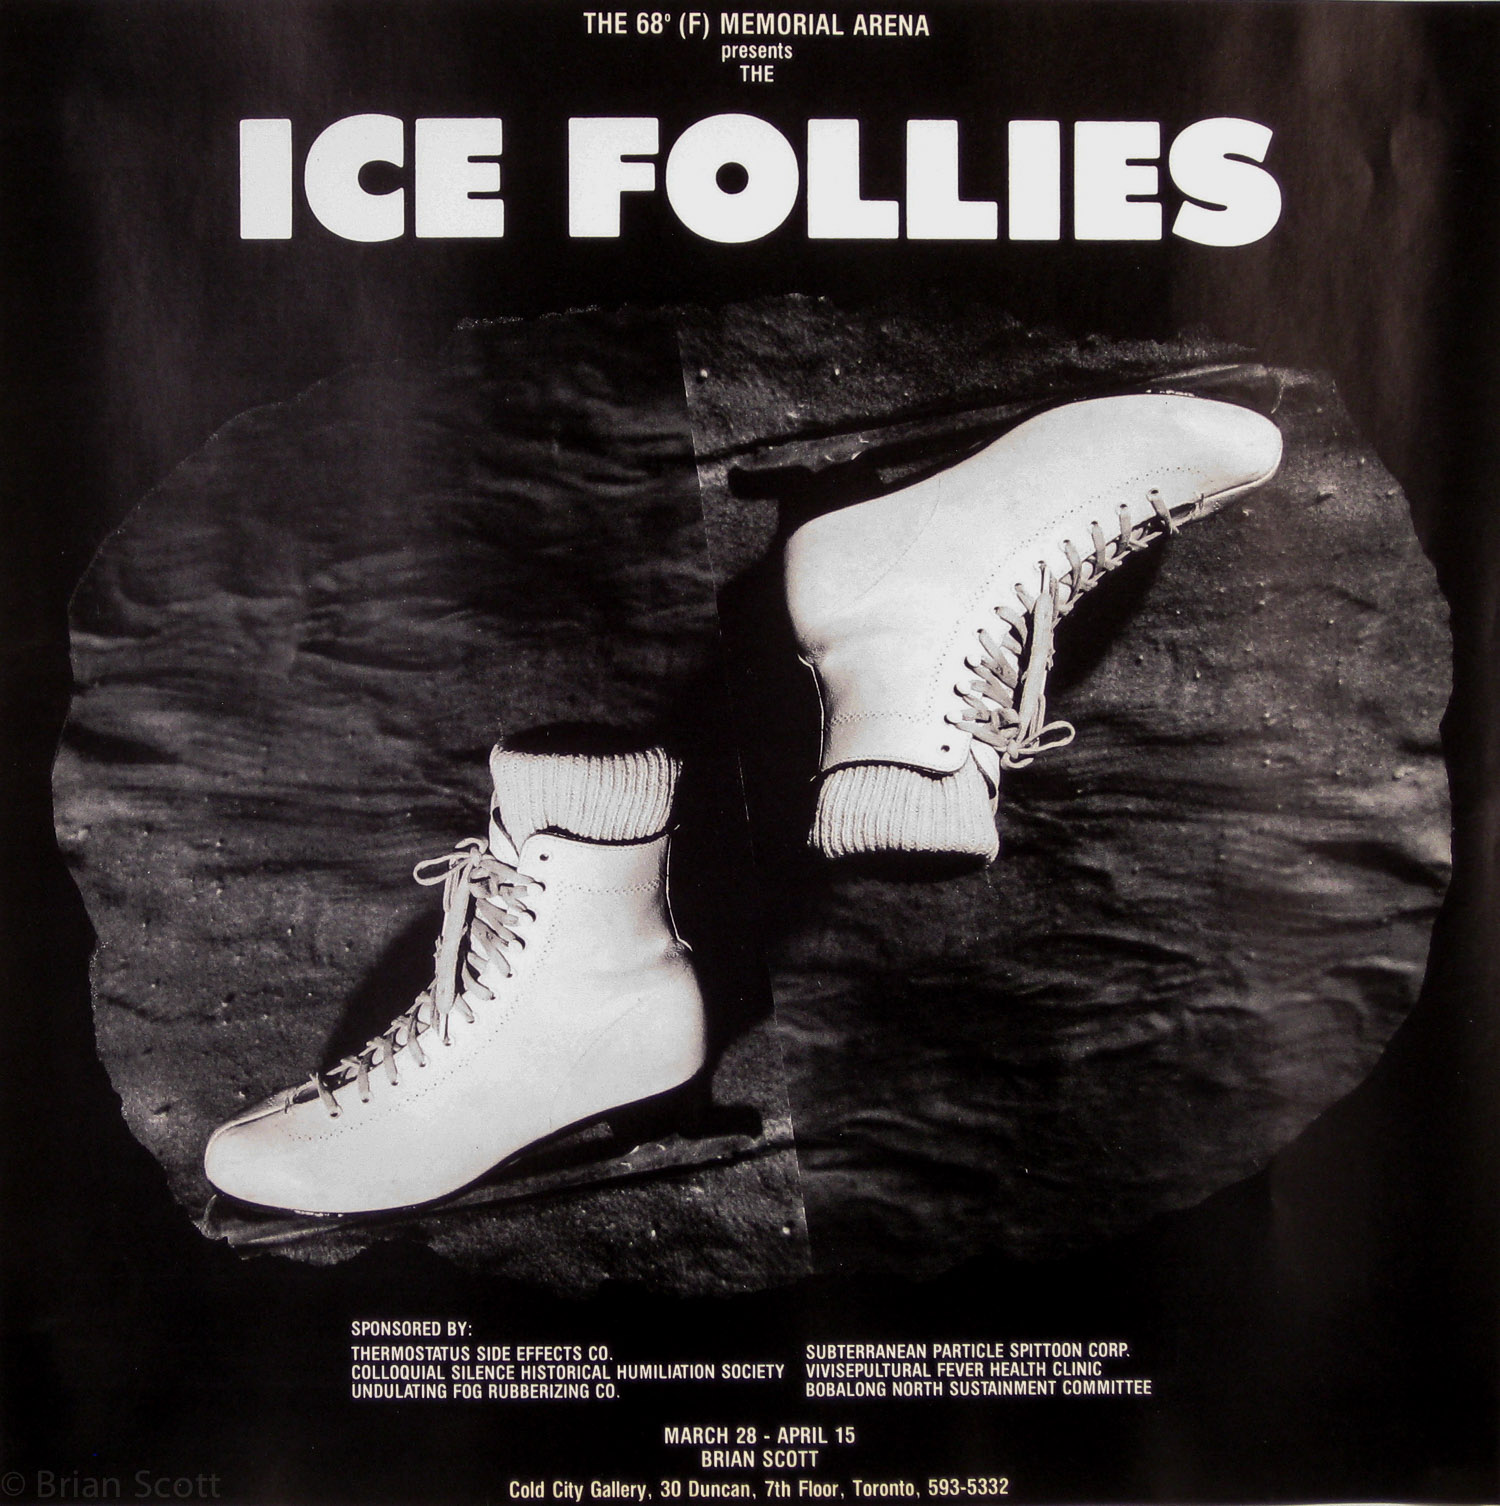 The 68º (F) Memorial Arena presents The Ice Follies